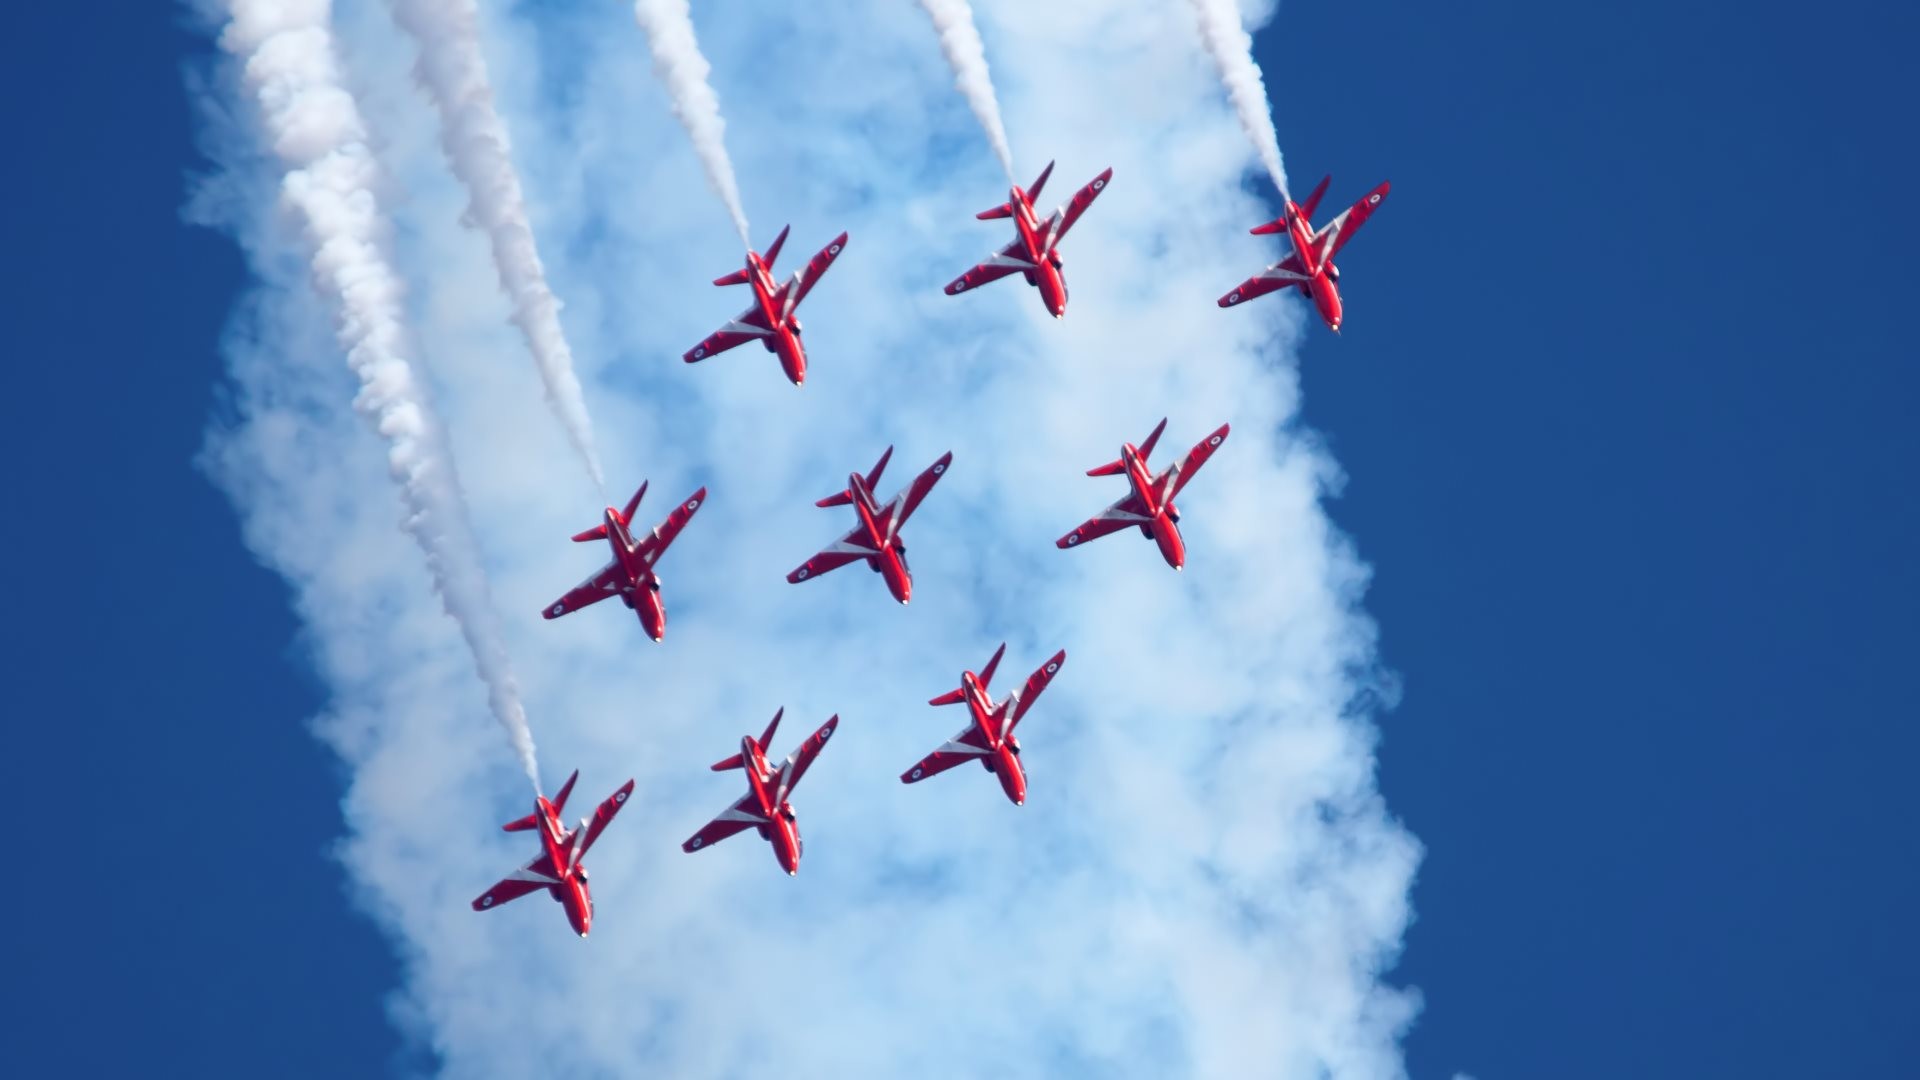 The 2nd Wallpaper With Red Arrows Royal Airforce Optimized - Clacton Airshow - HD Wallpaper 